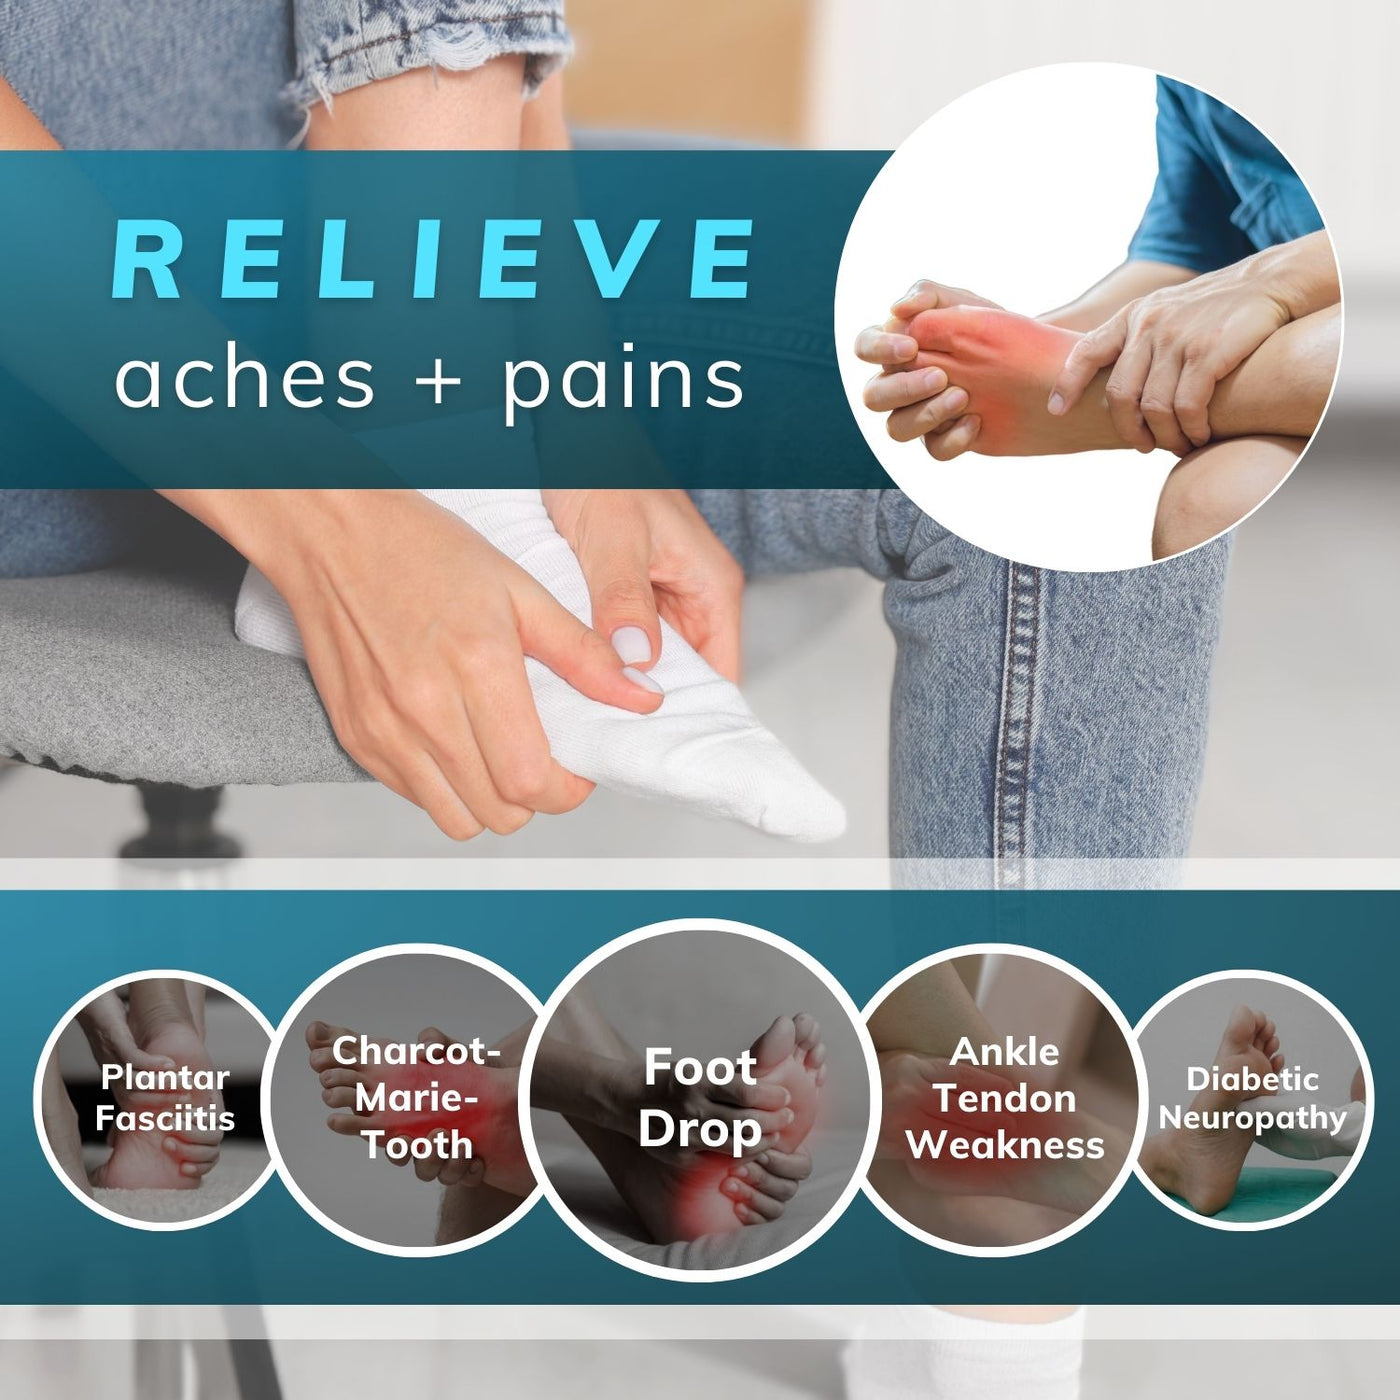 Our shoe dorsiflexion assist helps relieve pain from plantar fasciitis, foot drop, and ankle tendon weakness